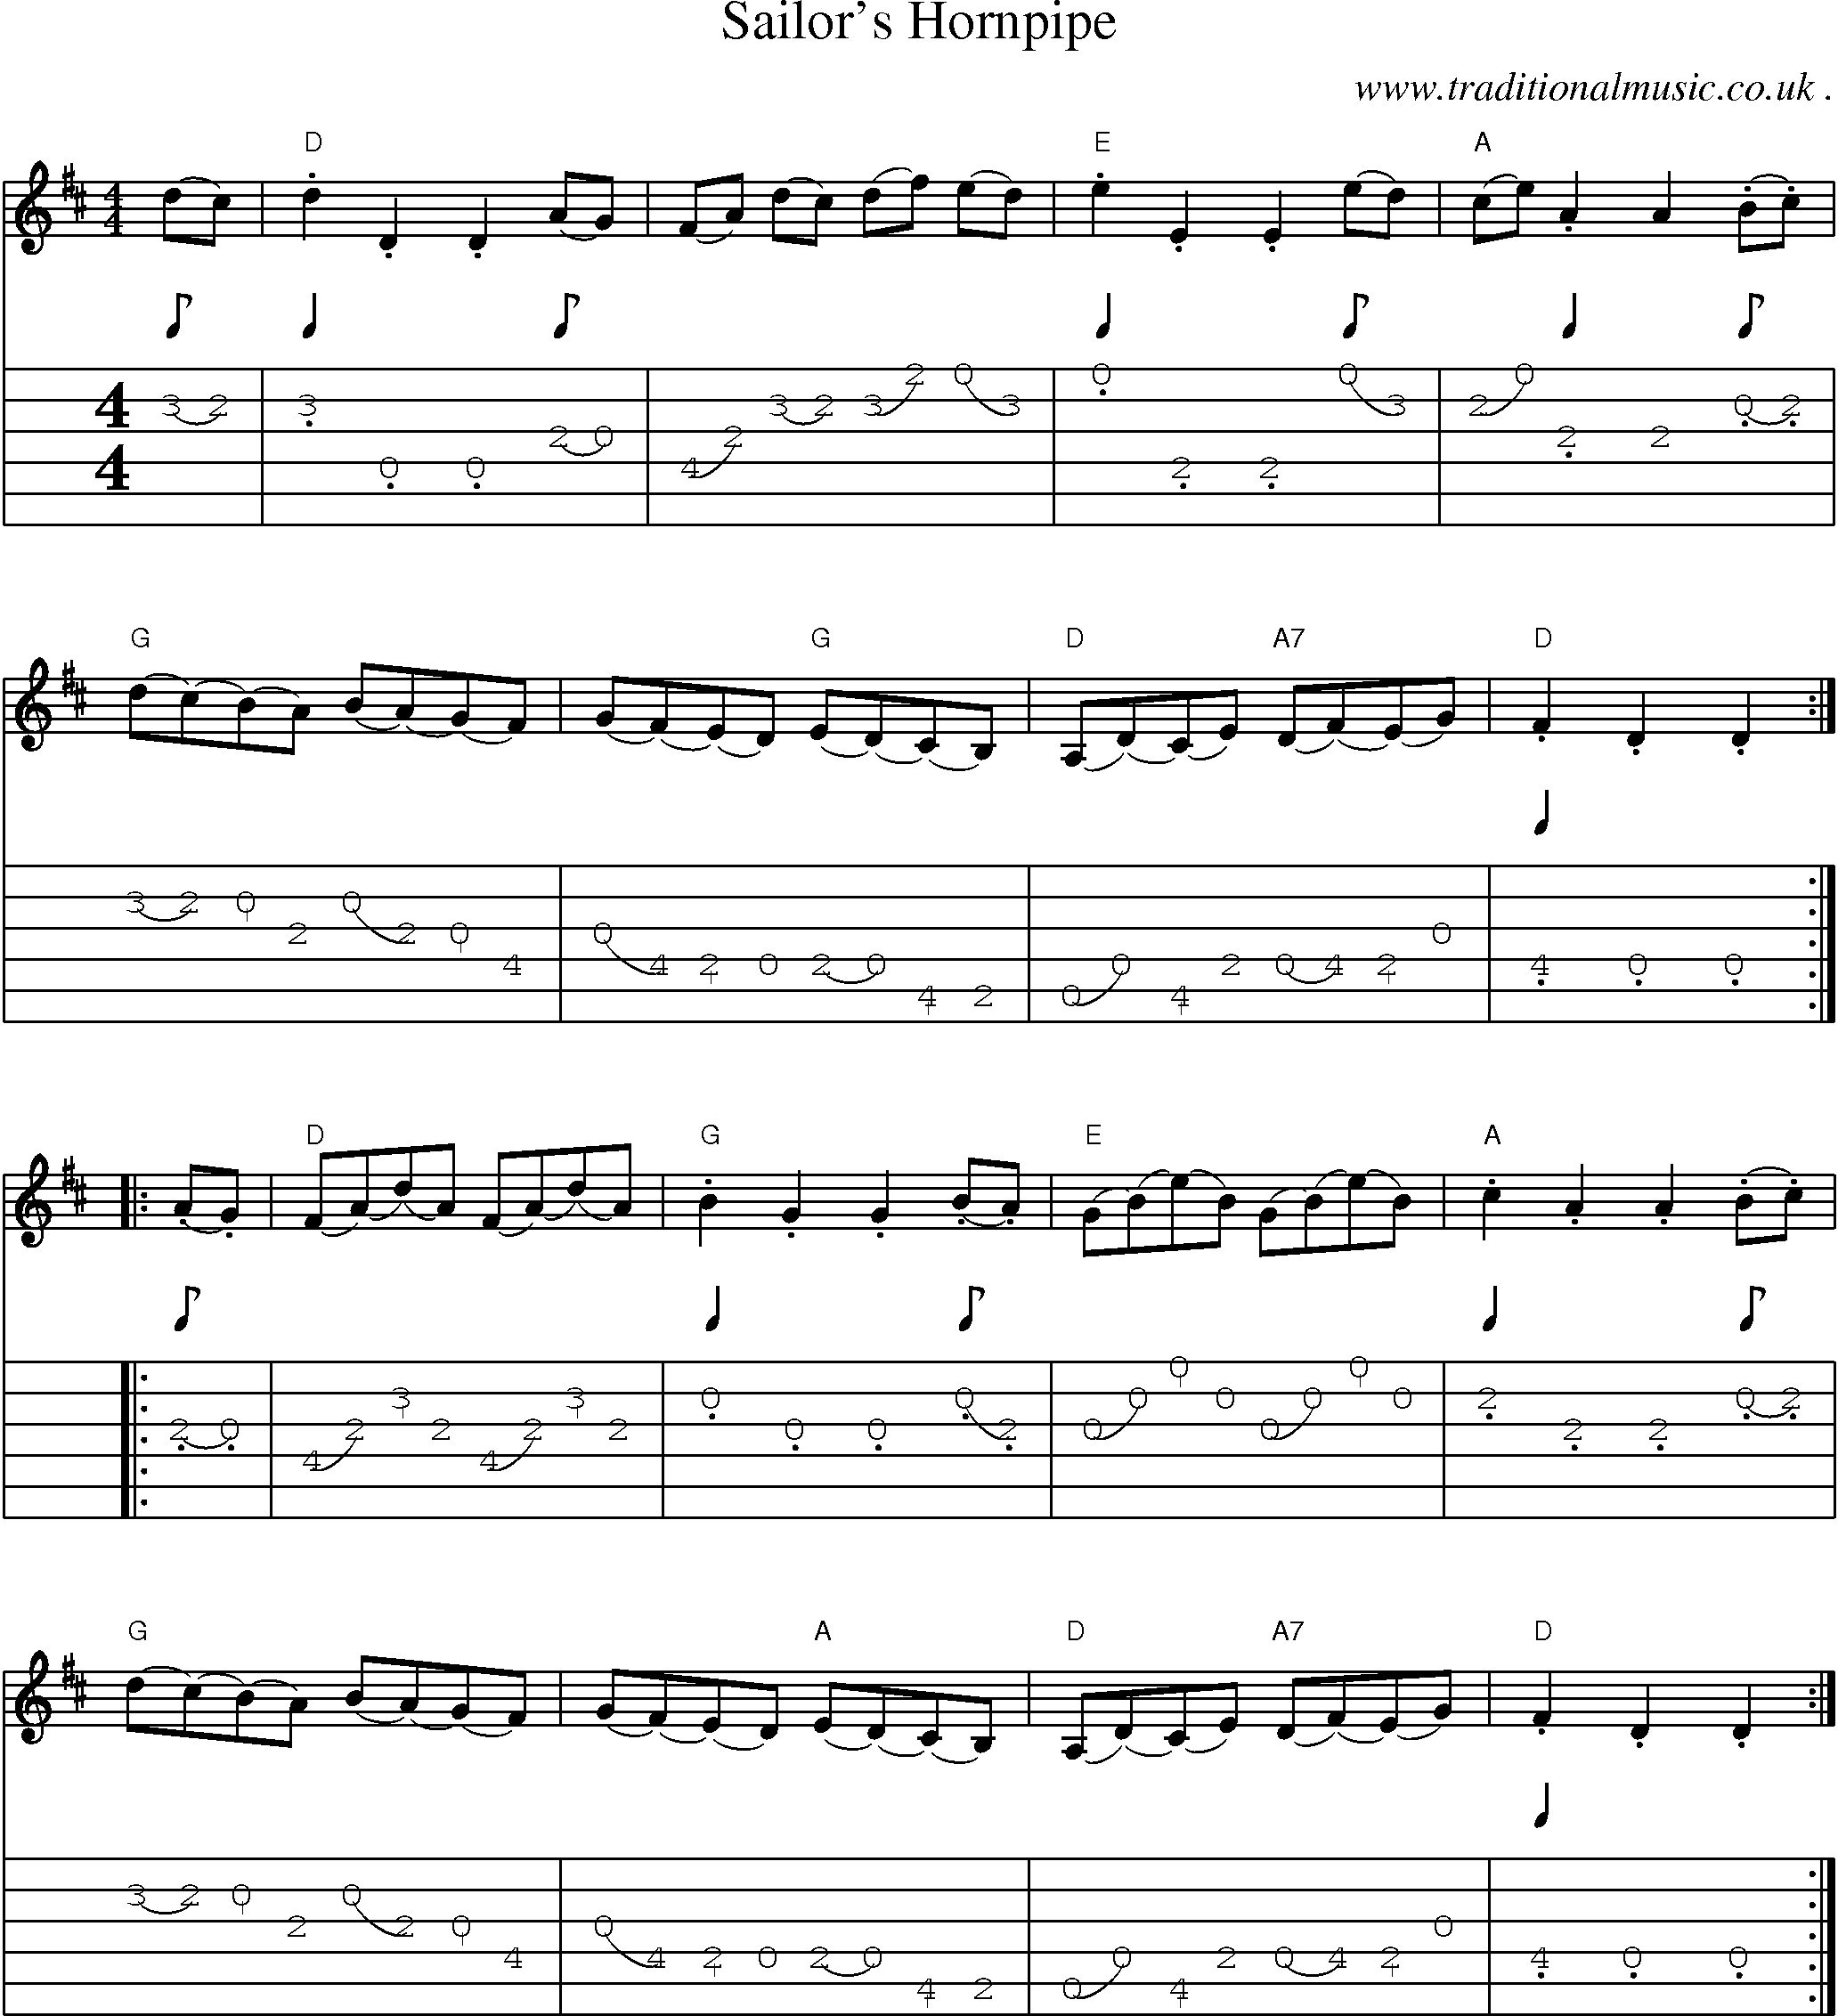 Music Score and Guitar Tabs for Sailors Hornpipe